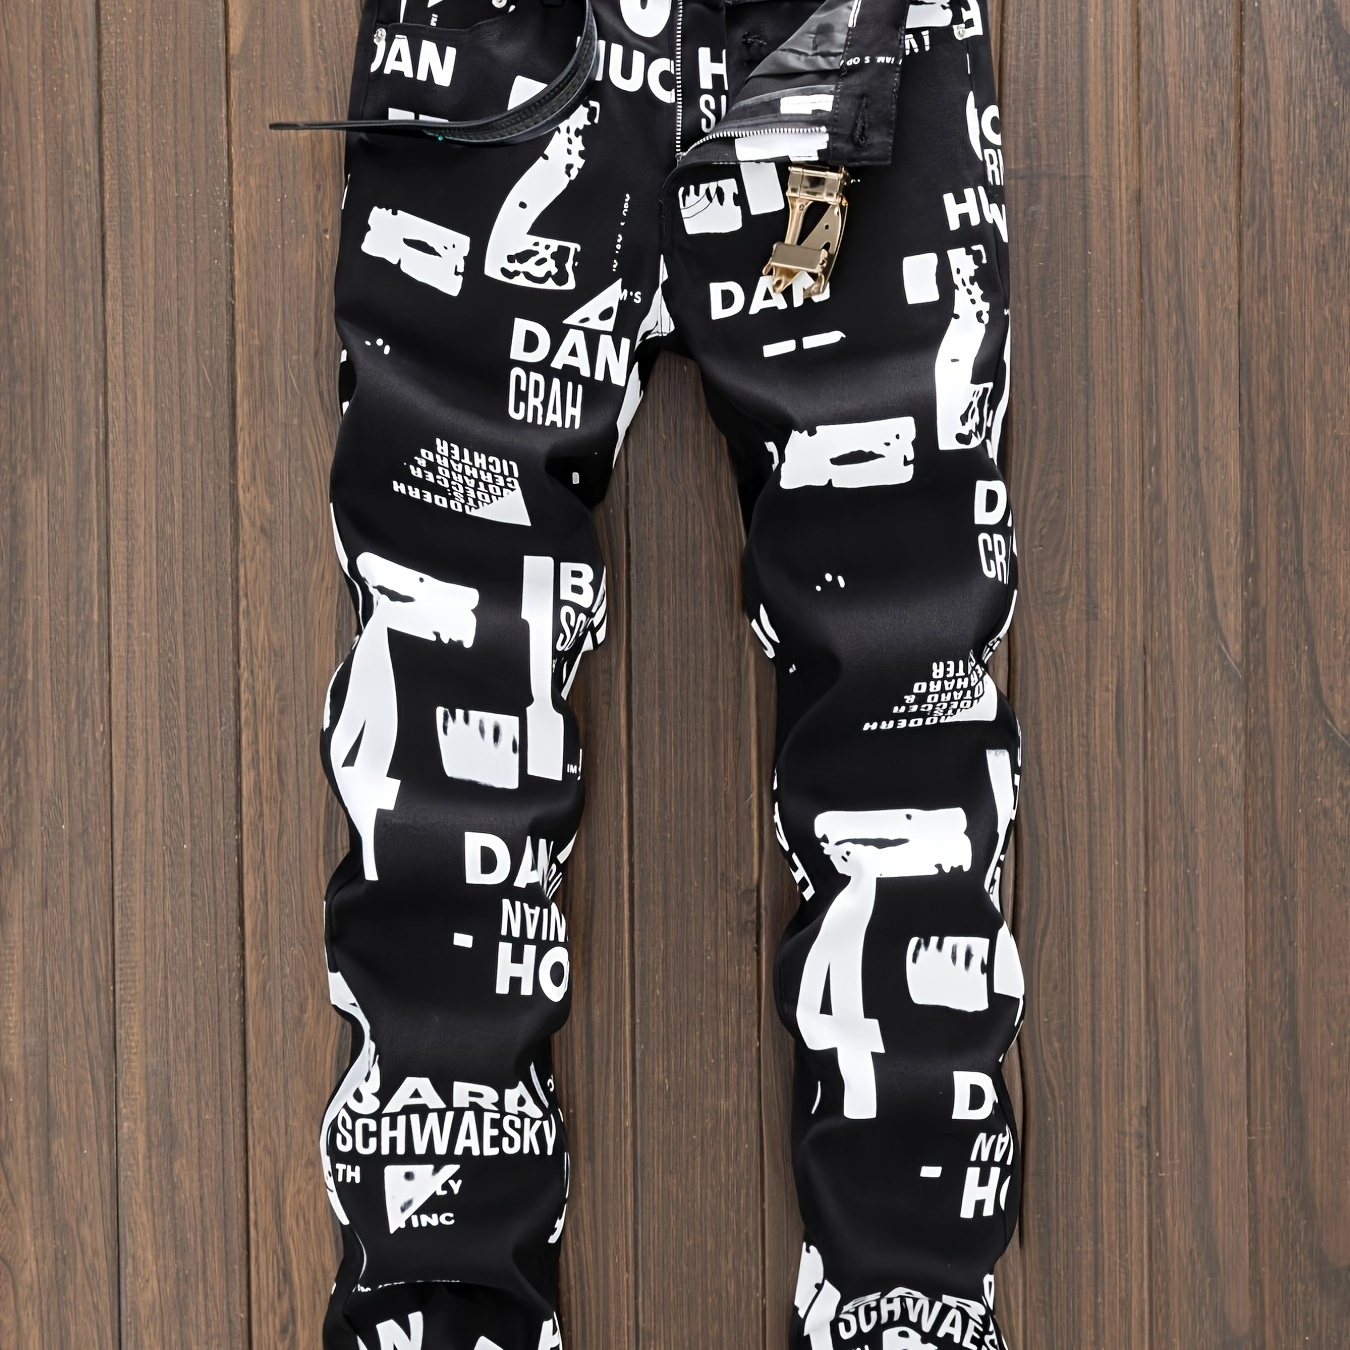 

Fashionable Design Men's Contrast Color Letter And Print Cotton Blend Slim Fit Denim Pants, Chic And Stylish Jeans For Street And Daily Leisurewear